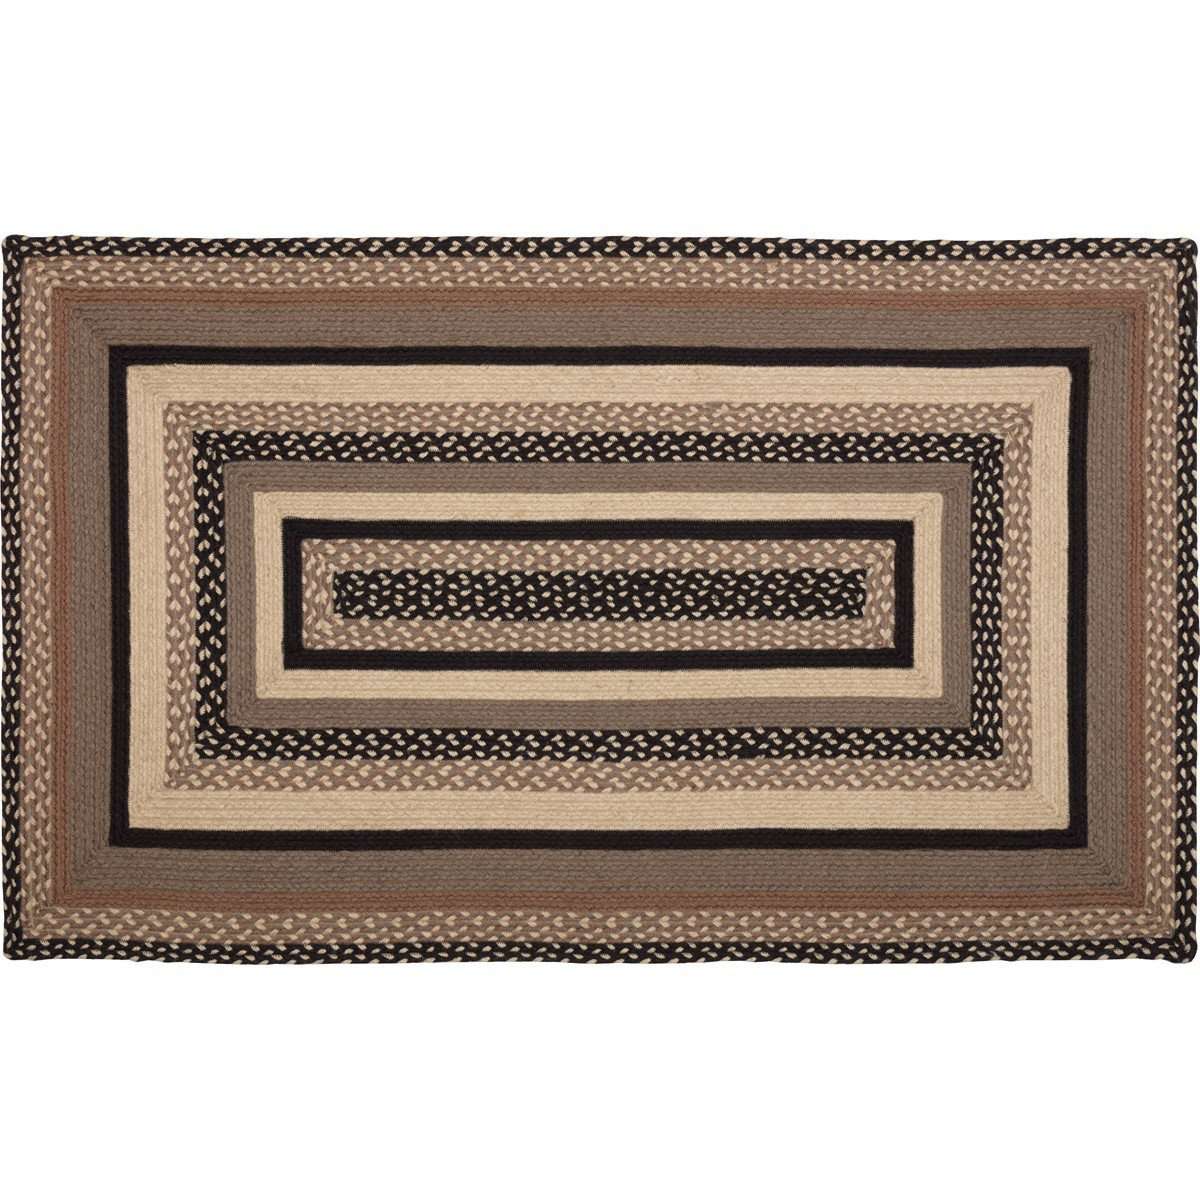 Sawyer Mill Charcoal Jute Braided Rectangle Rugs VHC Brands Rugs VHC Brands 